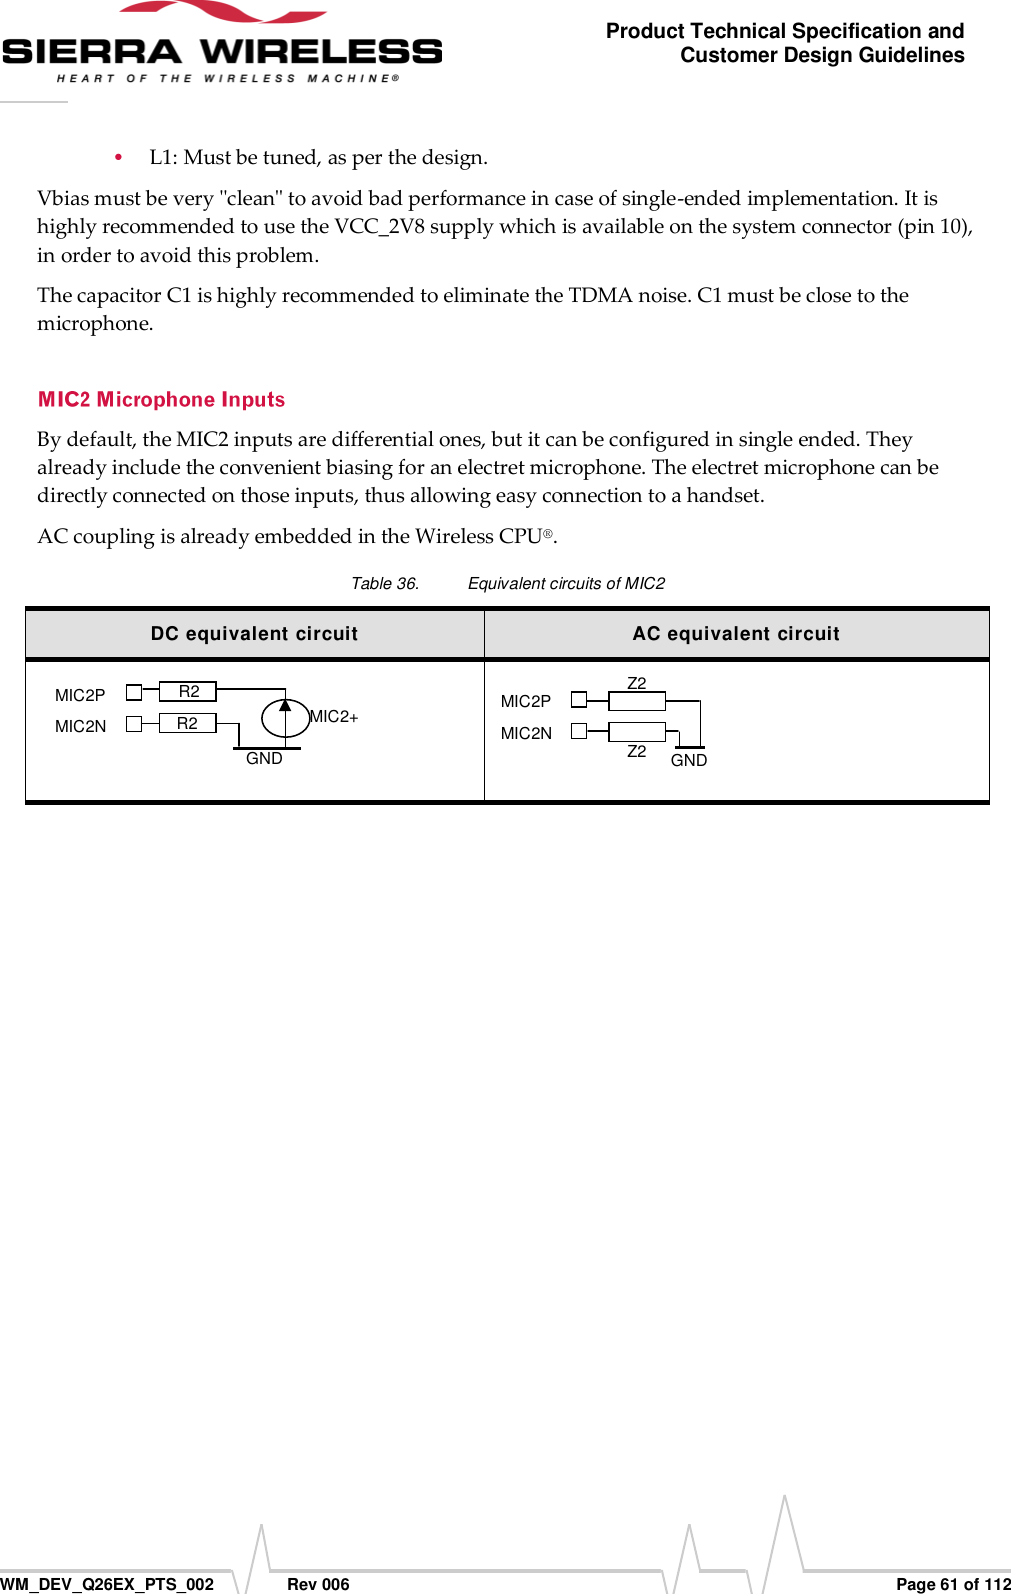      WM_DEV_Q26EX_PTS_002  Rev 006  Page 61 of 112 Product Technical Specification and Customer Design Guidelines  L1: Must be tuned, as per the design. Vbias must be very &quot;clean&quot; to avoid bad performance in case of single-ended implementation. It is highly recommended to use the VCC_2V8 supply which is available on the system connector (pin 10), in order to avoid this problem.  The capacitor C1 is highly recommended to eliminate the TDMA noise. C1 must be close to the microphone. By default, the MIC2 inputs are differential ones, but it can be configured in single ended. They already include the convenient biasing for an electret microphone. The electret microphone can be directly connected on those inputs, thus allowing easy connection to a handset. AC coupling is already embedded in the Wireless CPU®. Table 36.  Equivalent circuits of MIC2 DC equivalent circuit AC equivalent circuit    MIC2P                         MIC2N                         Z2                          Z2  [GED Reference] [GED Reference] [GED Reference] [GED Reference] [GED Reference] [GED ReferGND [GED Reference] [Rev] [Date]    [GED Reference] [Rev] [Date]    [GED Reference] [Rev] [Date]    [GED Reference] [Rev] [Date]    MIC2+   [GED Reference]   [GED Reference]   [GED Reference]   [GED Reference]   [GED Reference]   [GED ReferenMIC2P                         MIC2N R2 R2 GND 